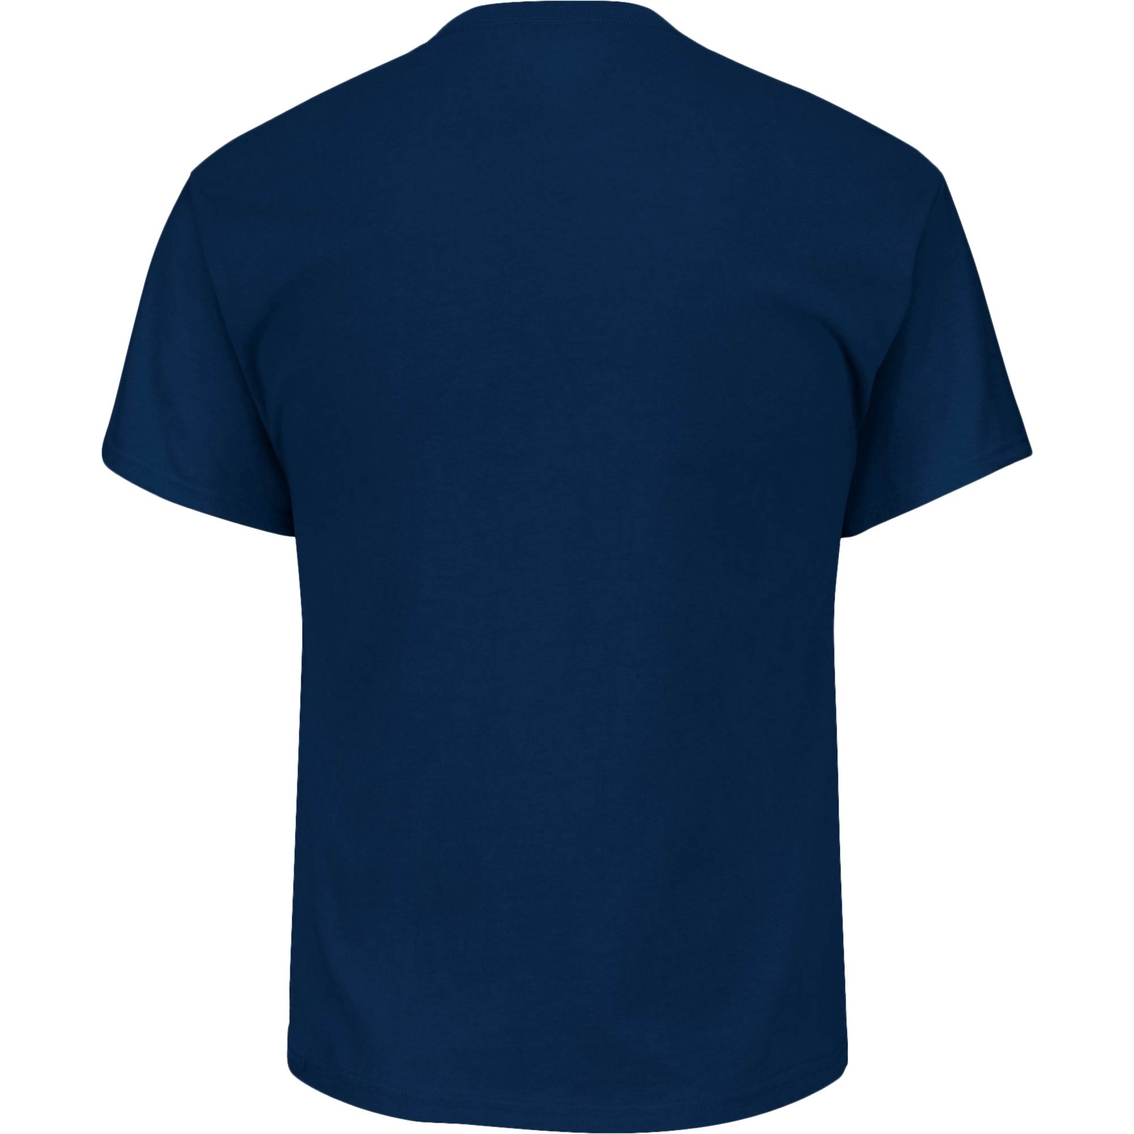 Majestic Athletic MLB Tampa Bay Rays Heart Soul Tee - Image 3 of 3